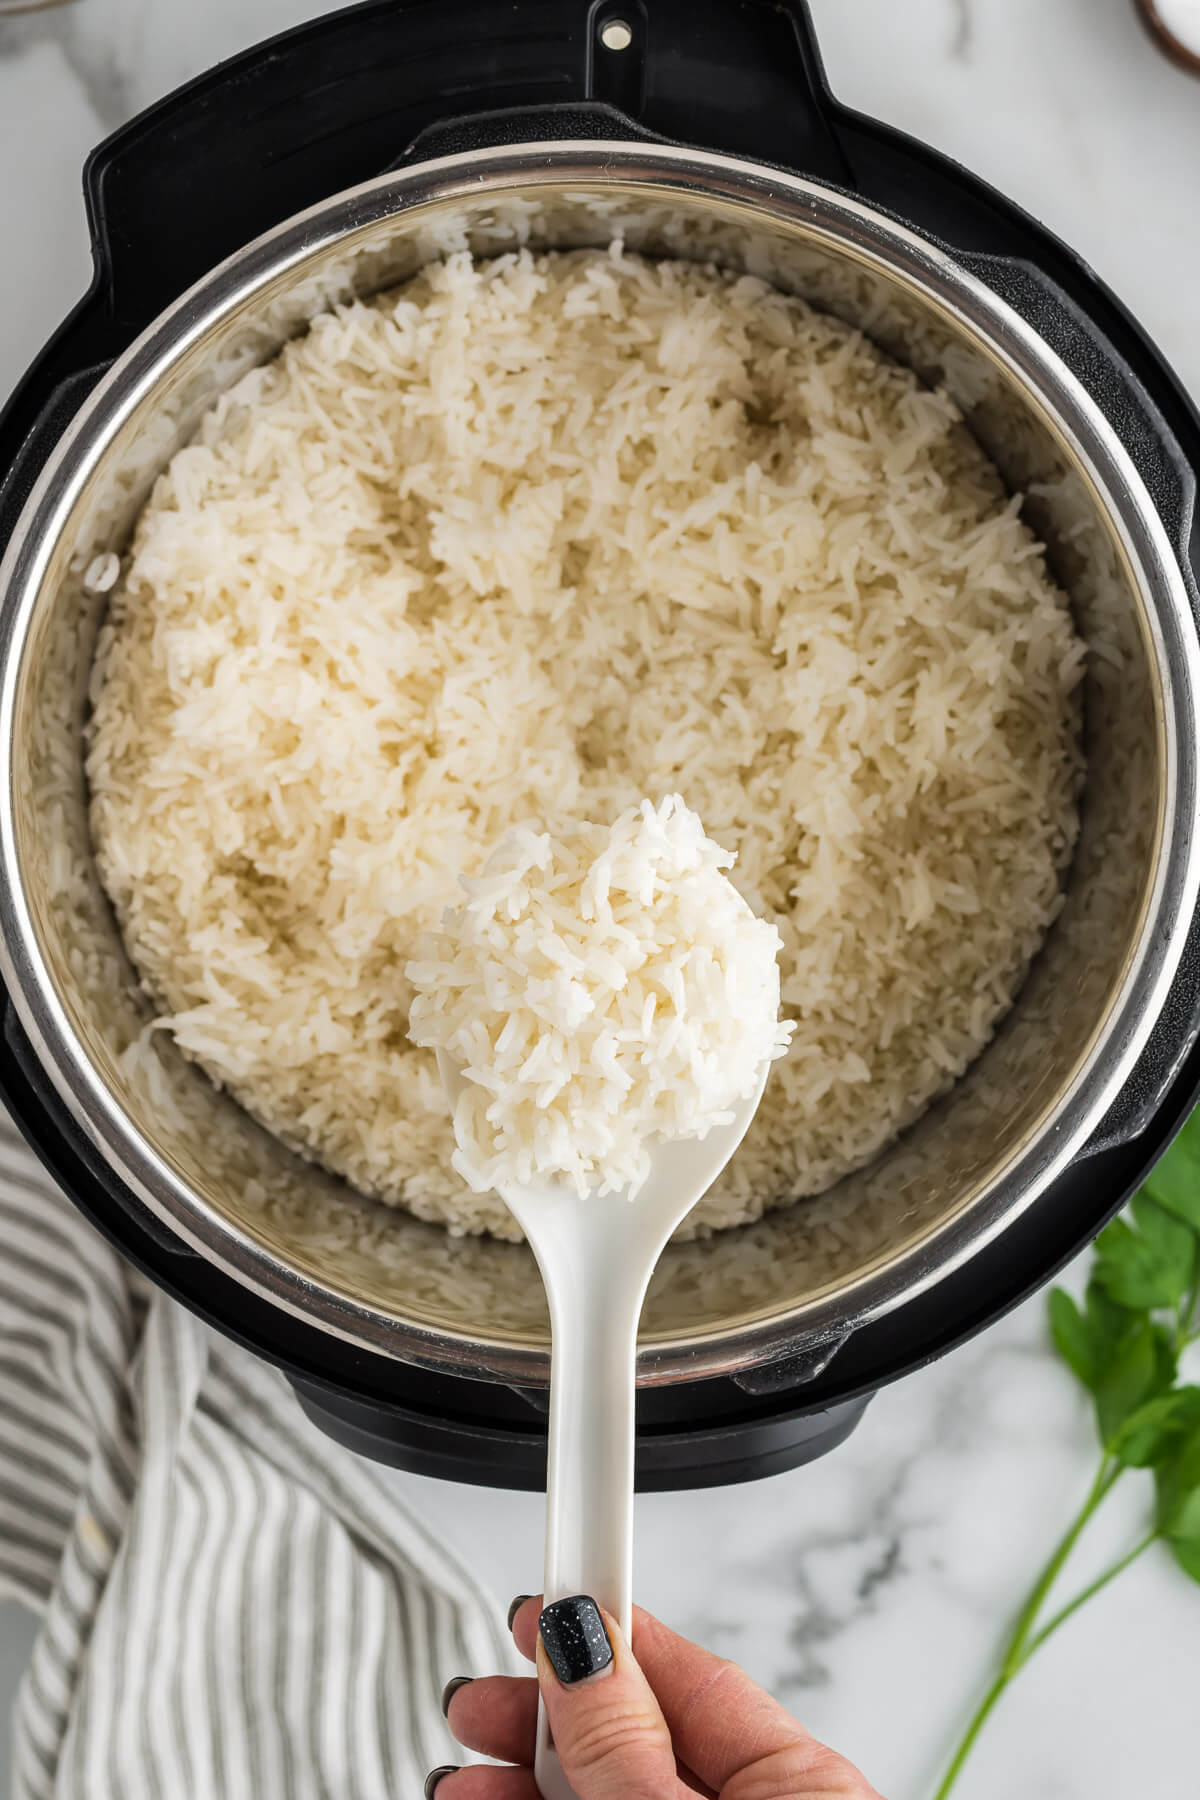 a hand holding a spoon of rice over an open instant pot.